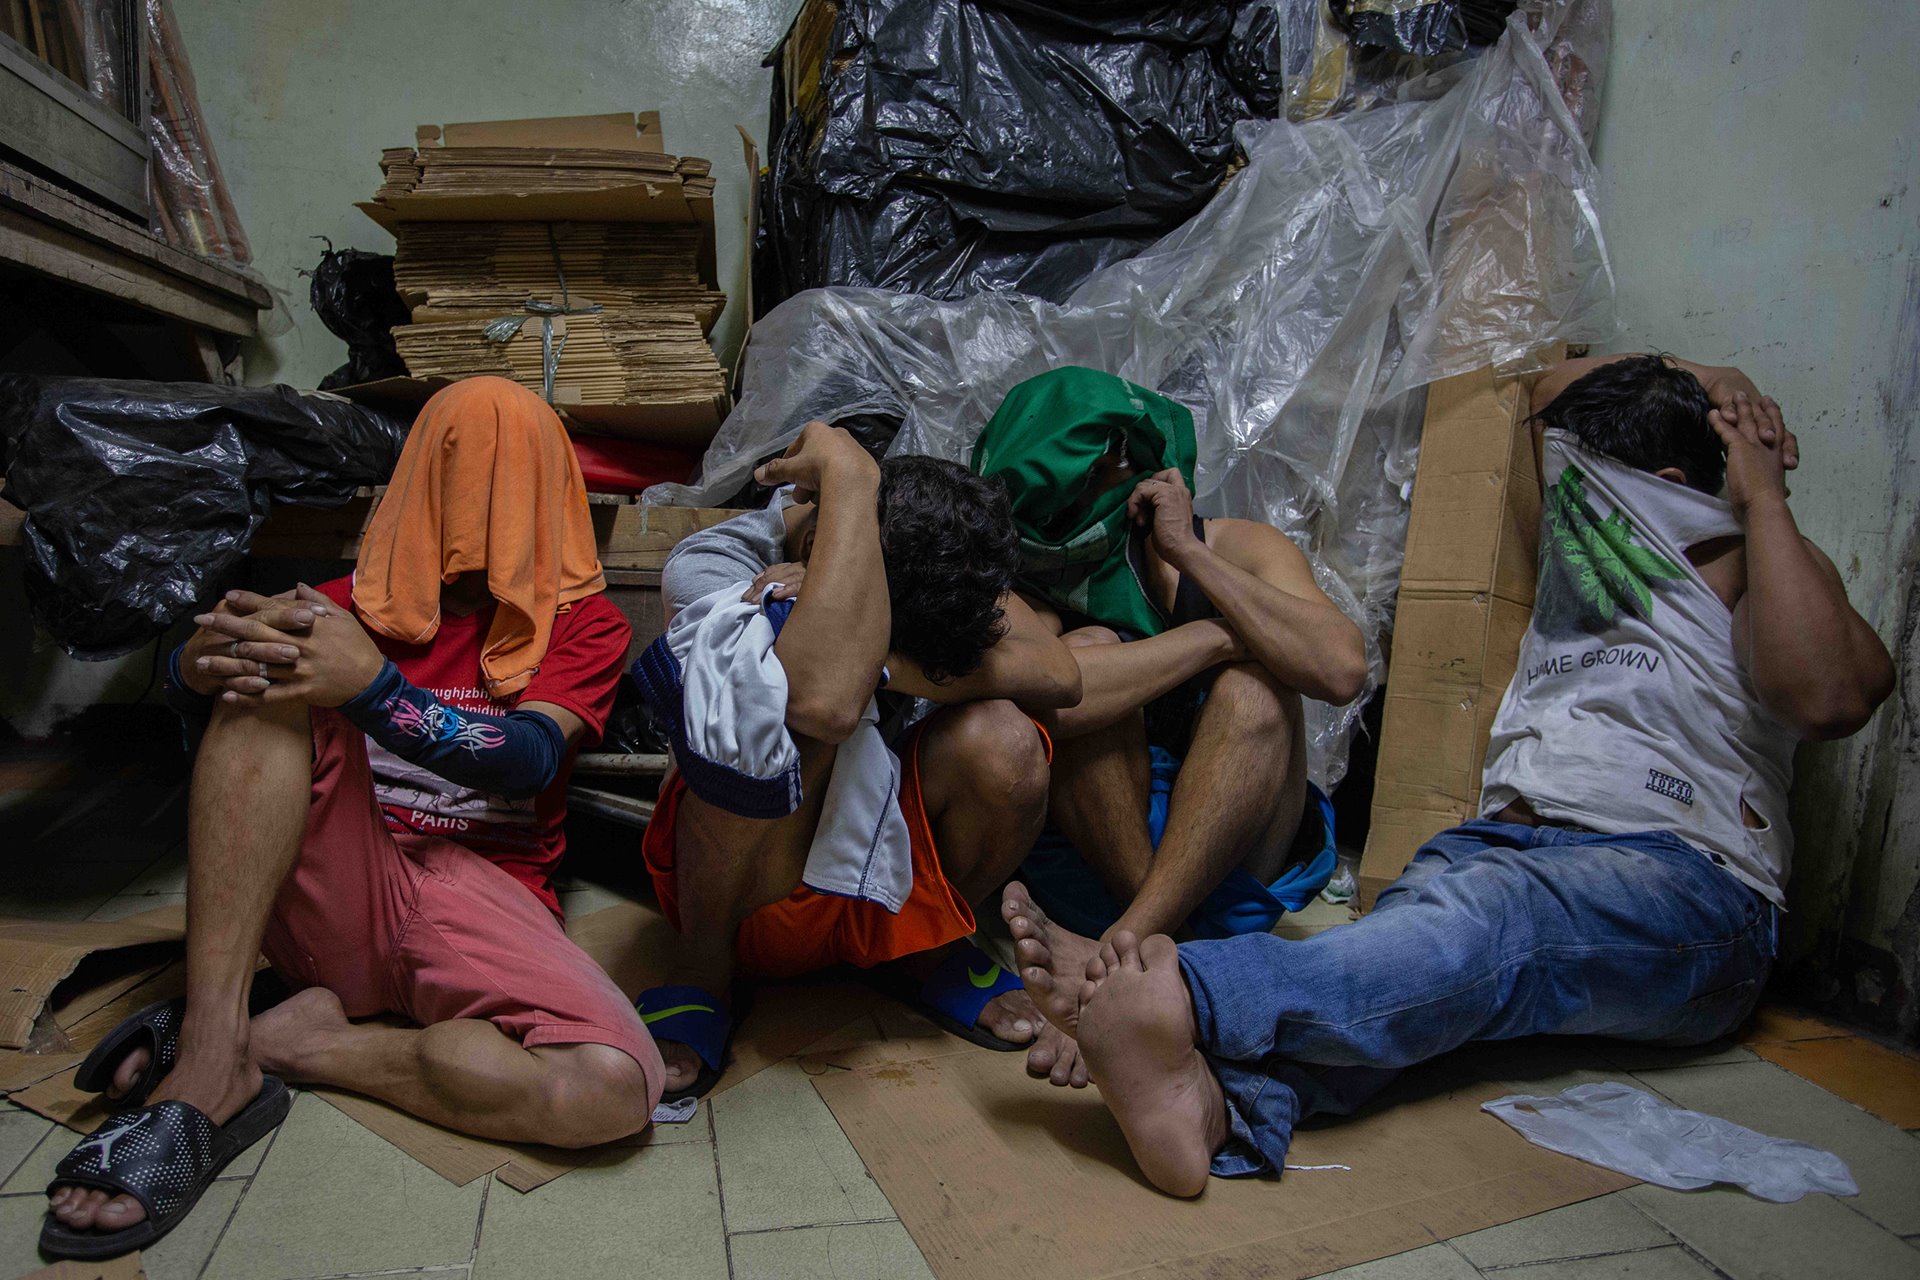 <p>Men shield their faces from the media after being arrested in a food factory that police claimed to be a drug den, in Pandacan, Manila, the Philippines. &nbsp;</p>
